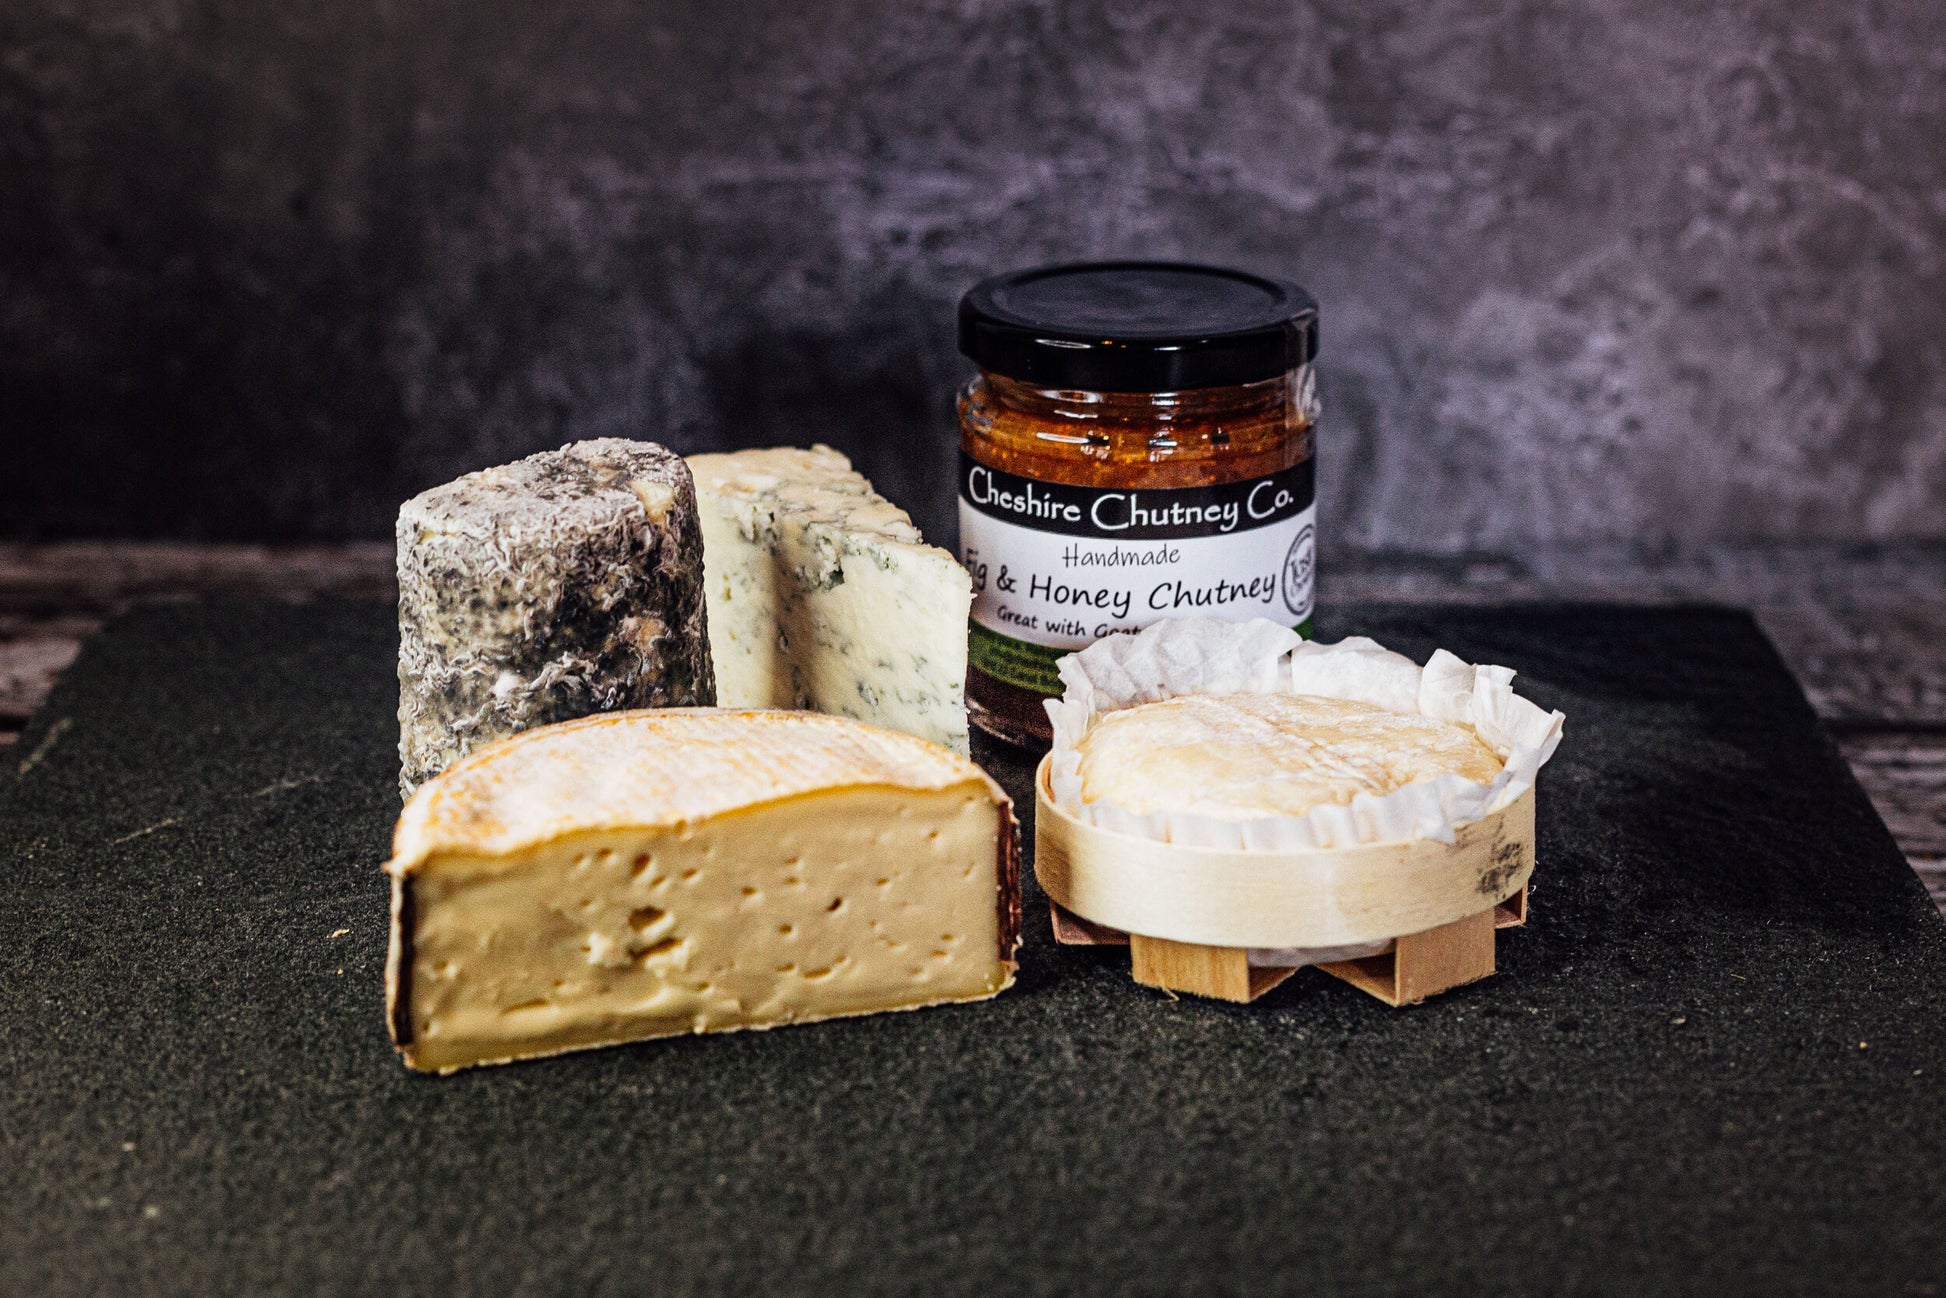 4 delicious looking artisanal cheeses on a slate, showing a mix of colours, shapes and textures, with an additional jar of honey